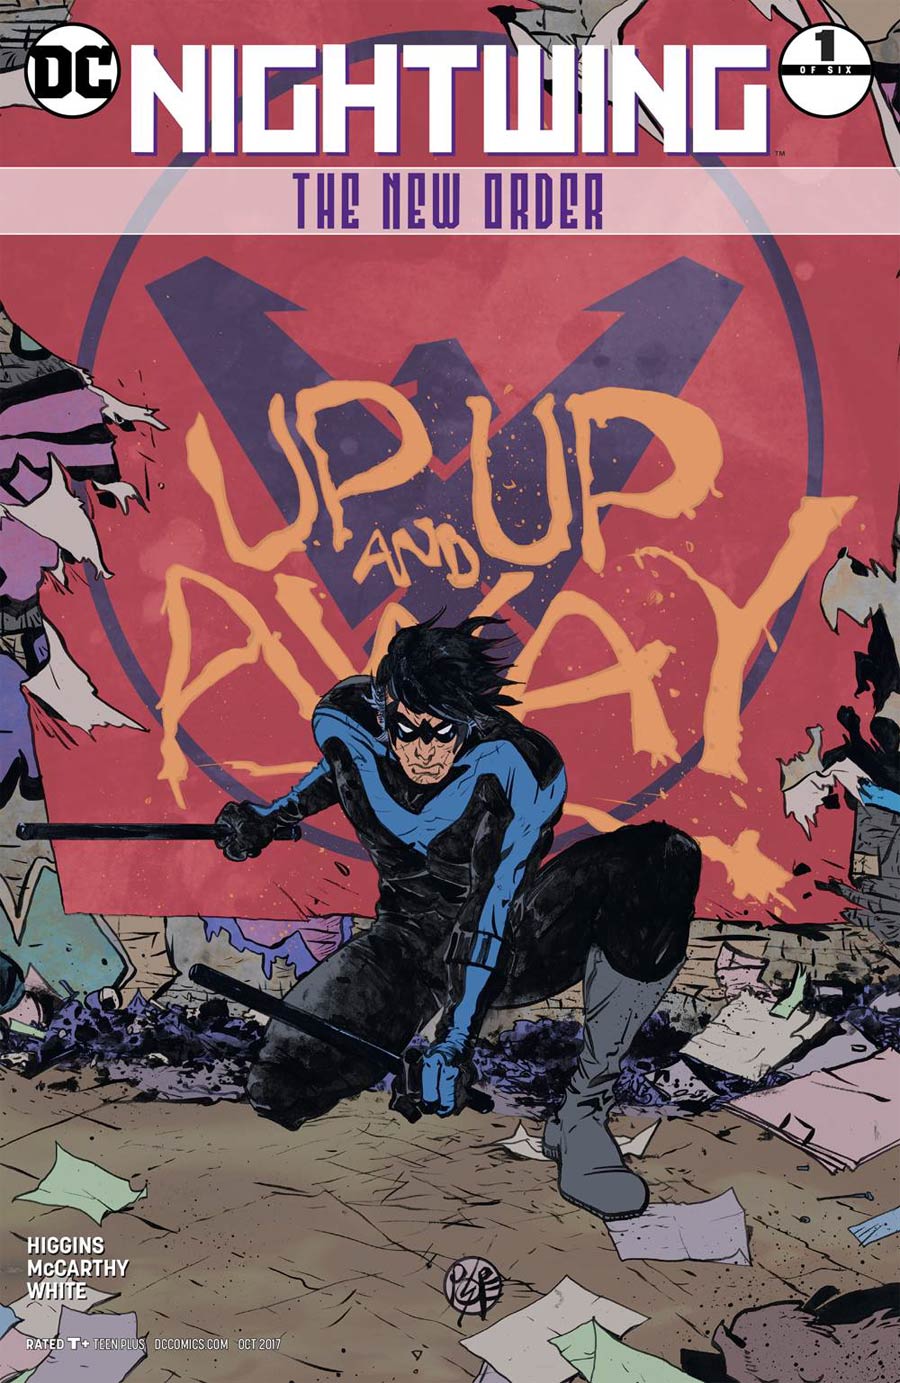 Undercover: 'Nightwing: The New Order' #1